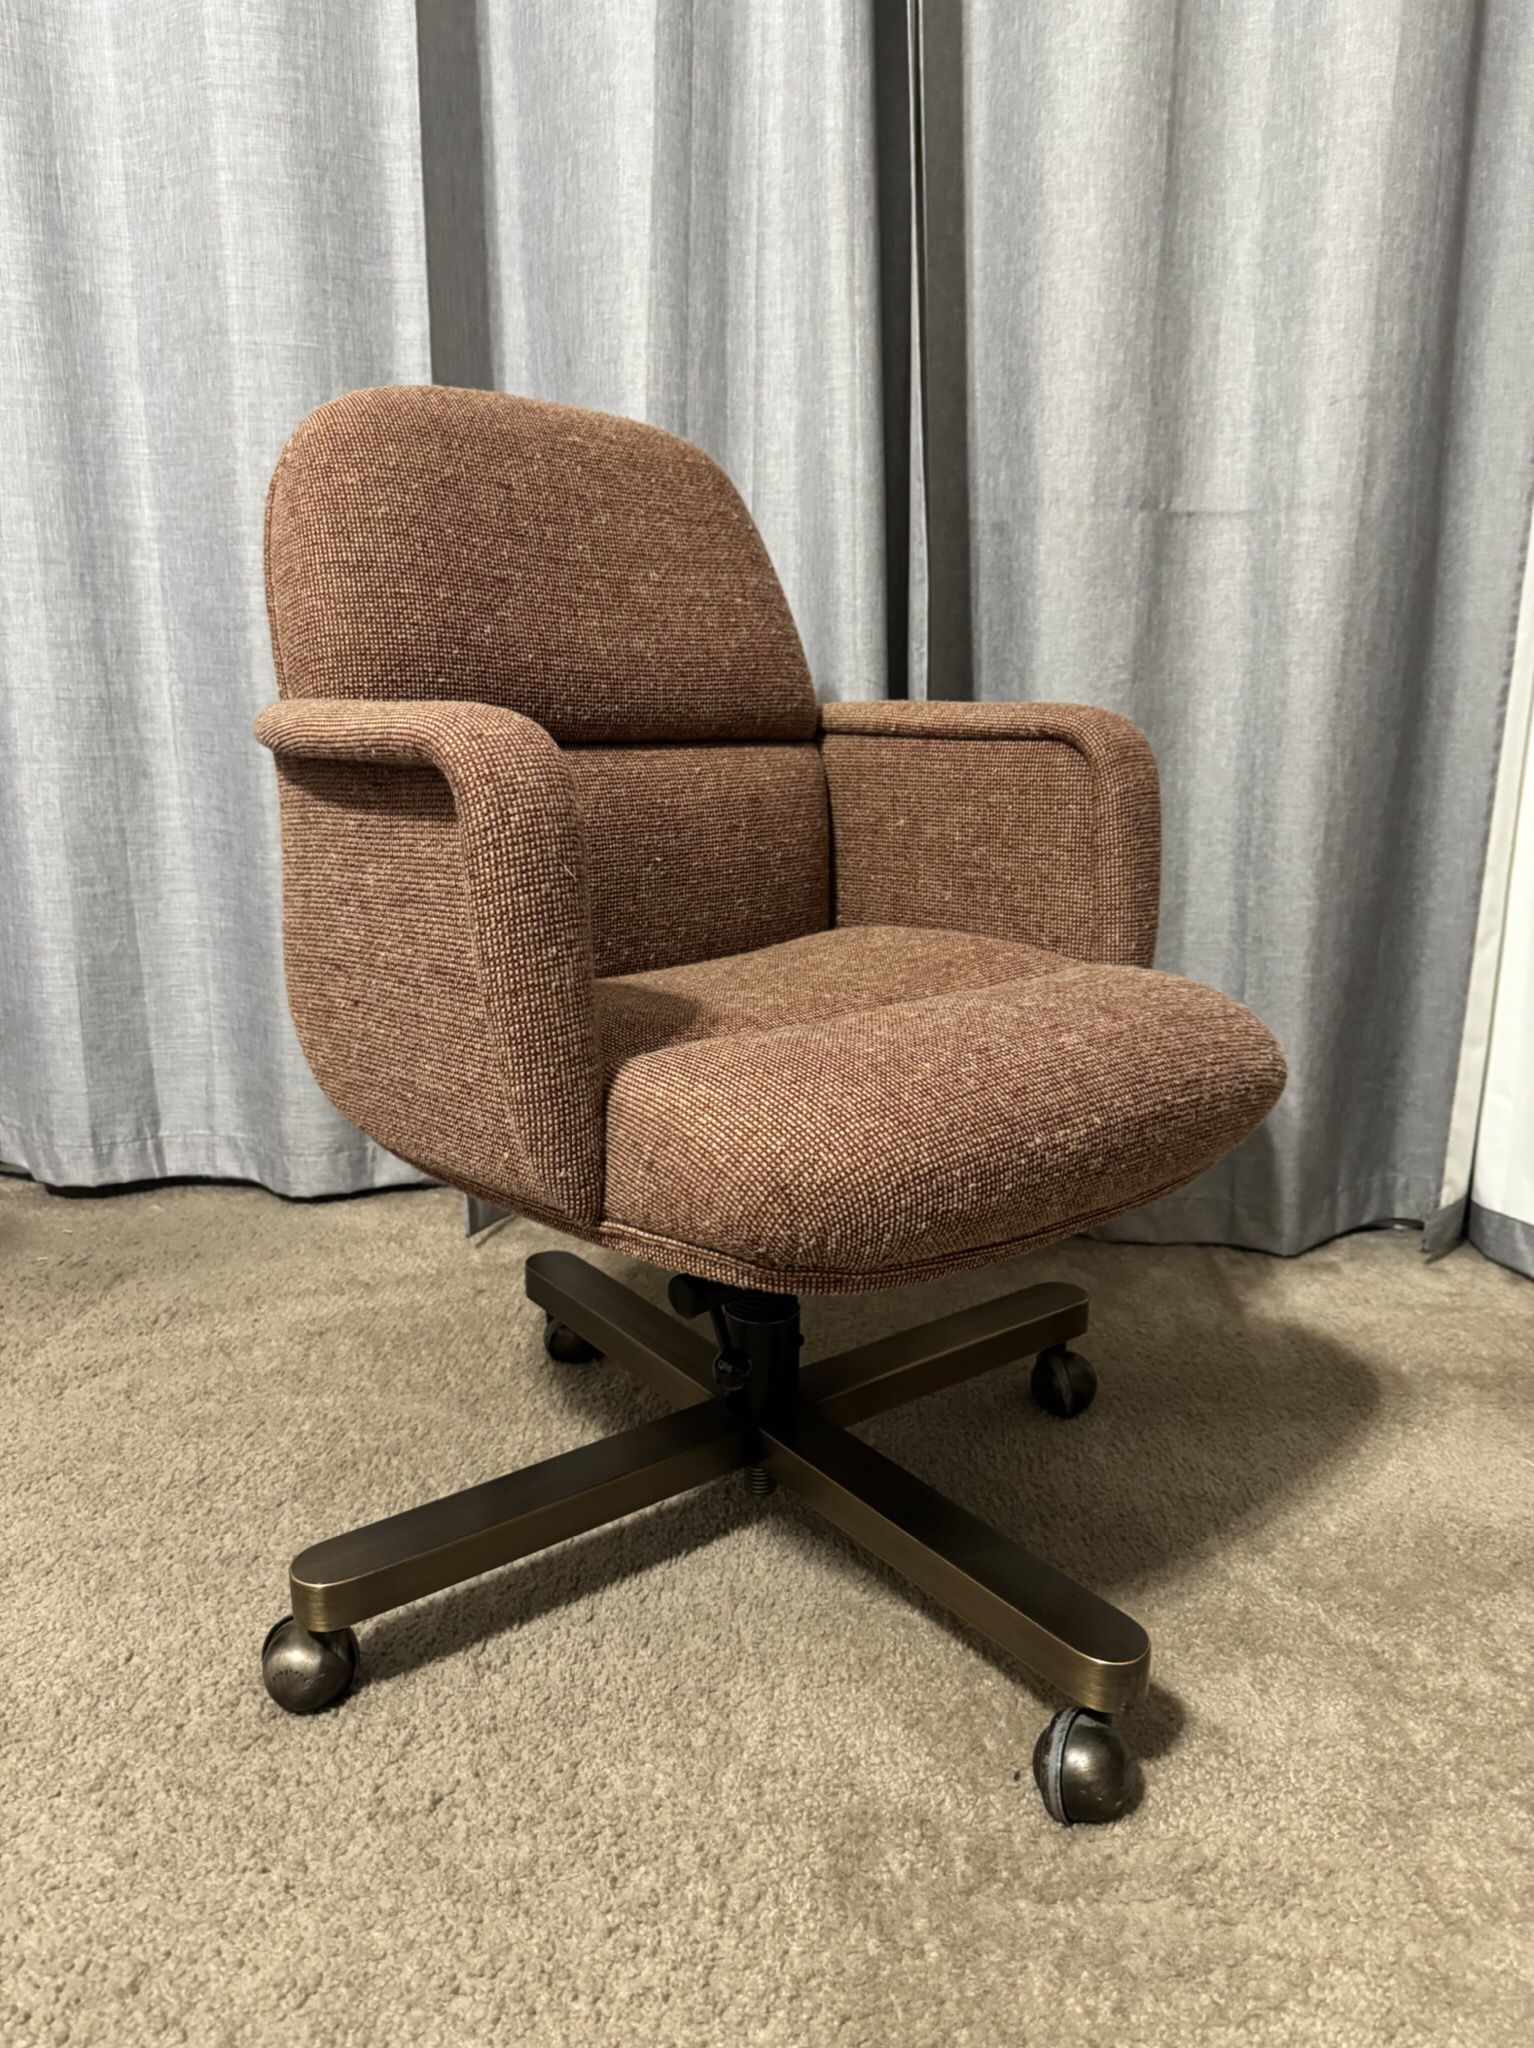 1980s Vintage Desk Chair by Hiebert Incorporated 